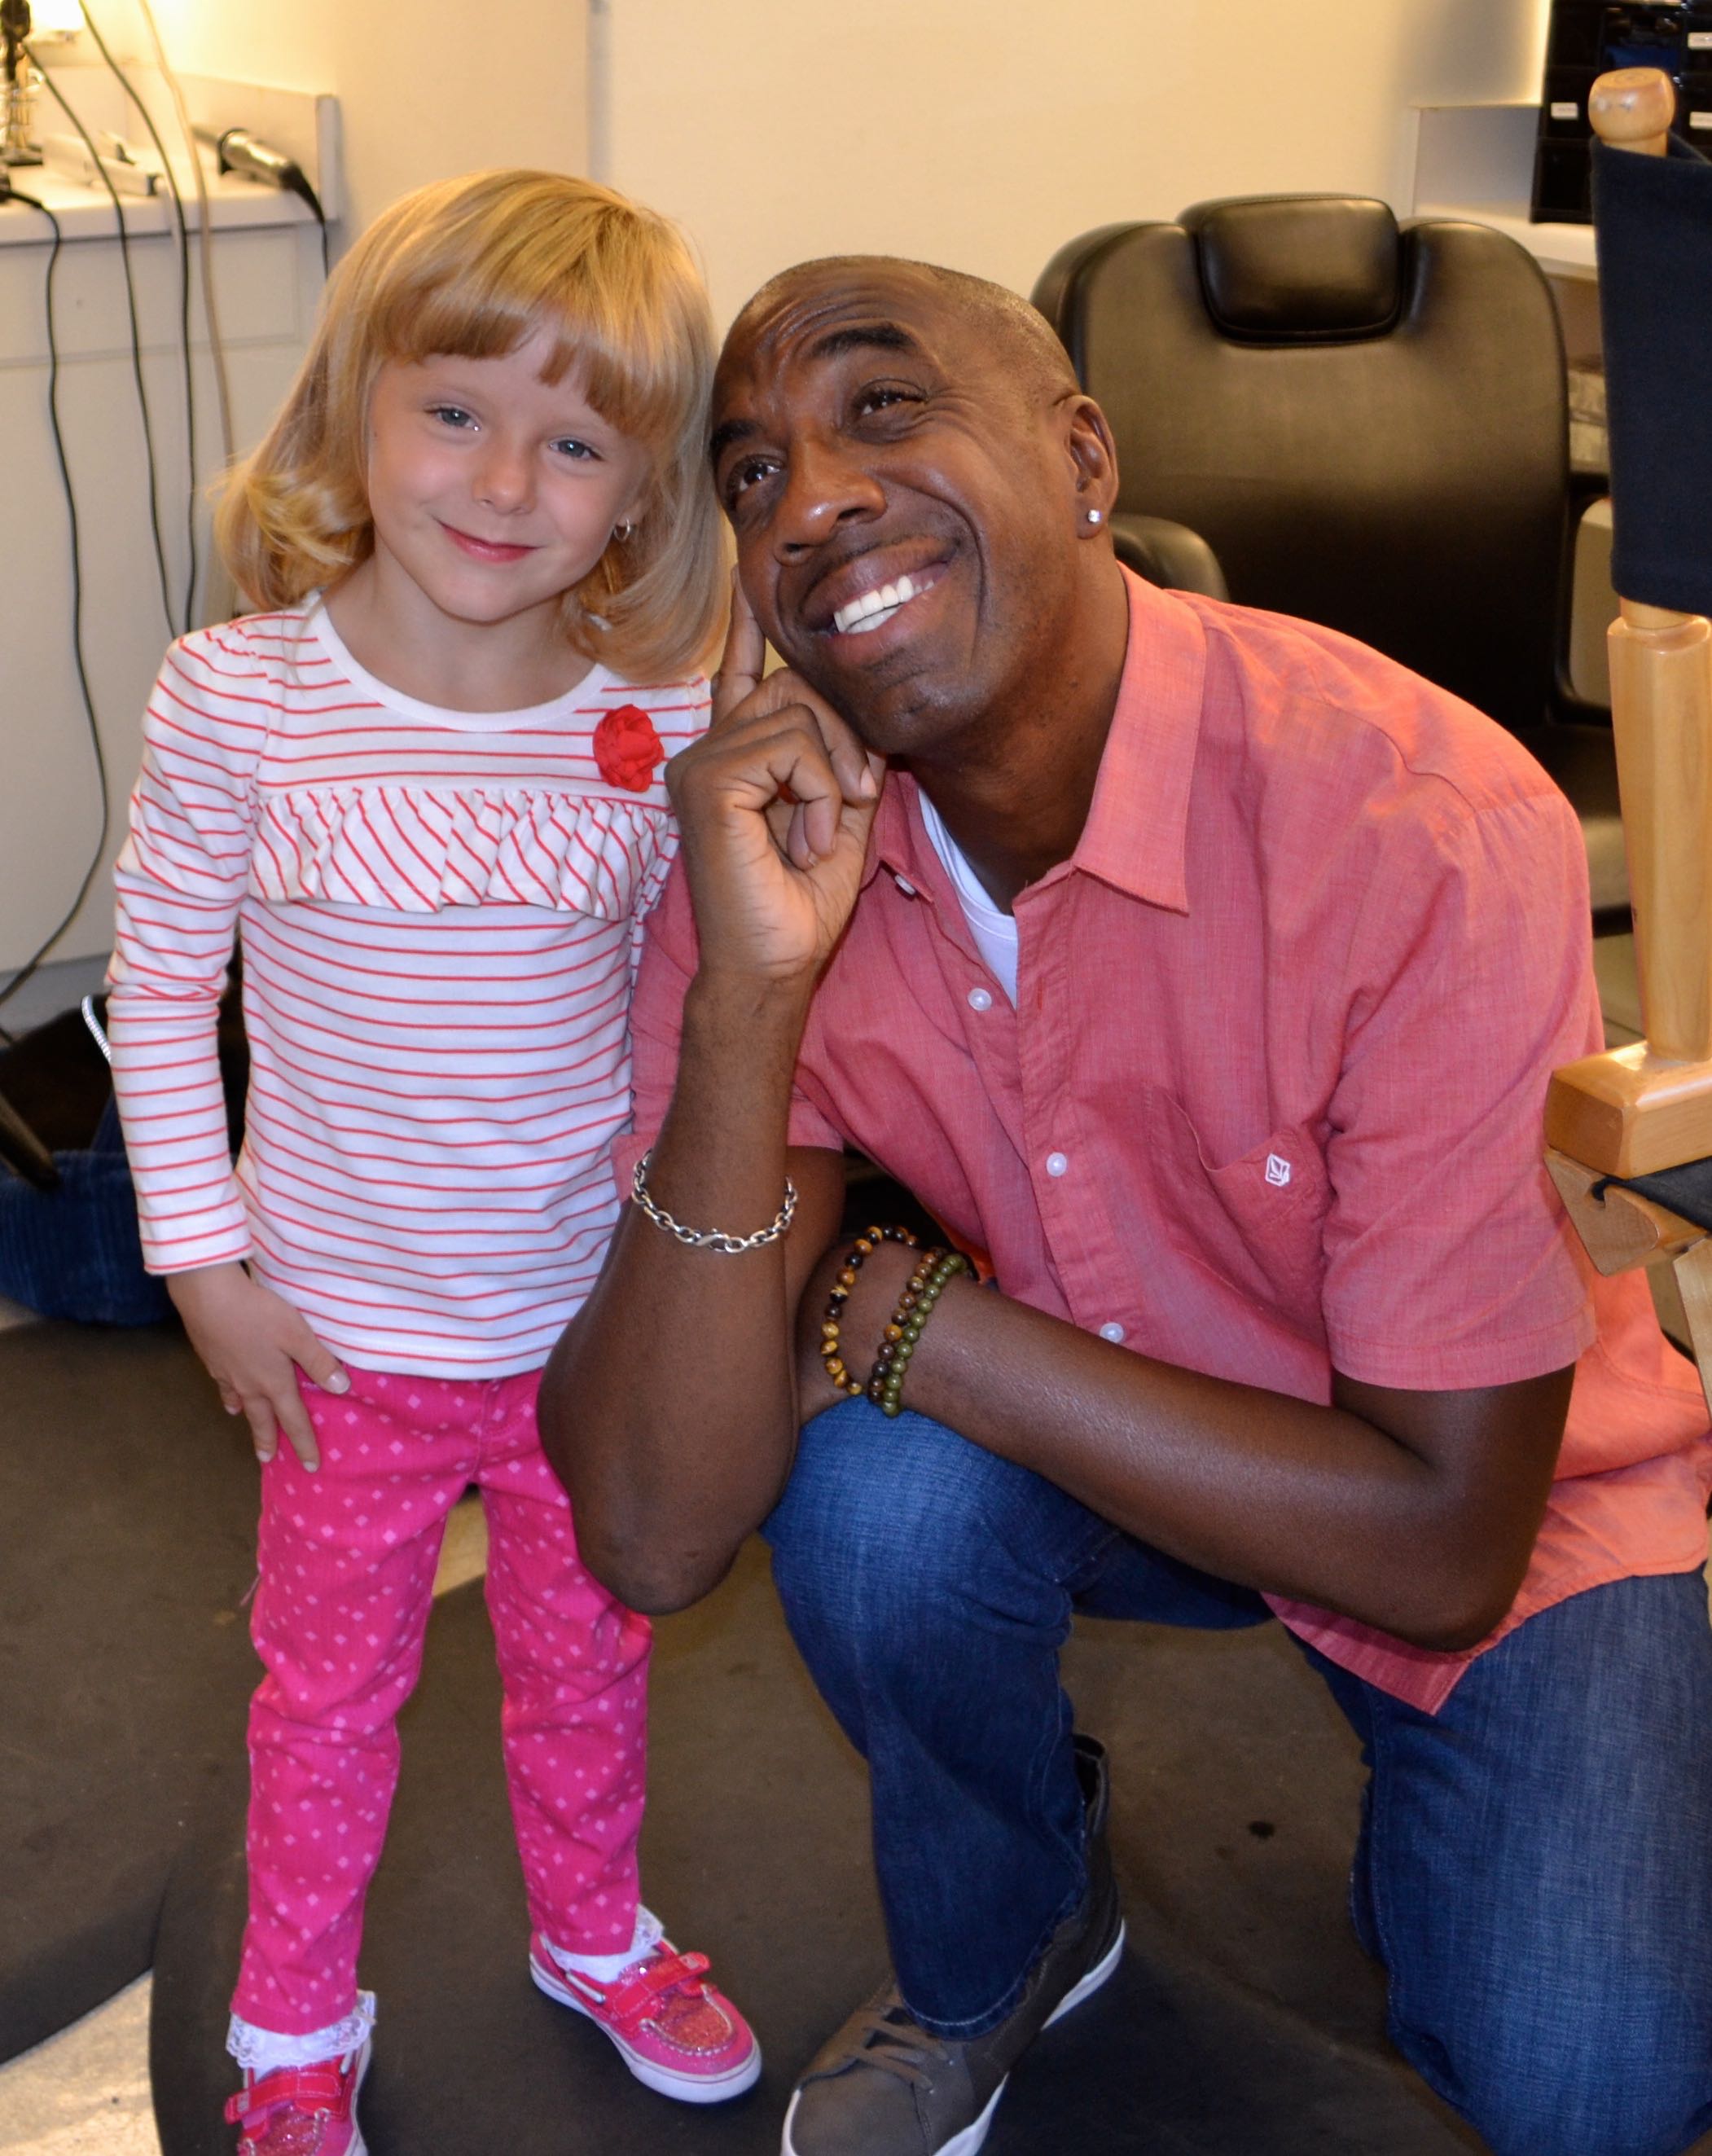 Paige MIchaels, J.B. Smoove prepping for set on The Millers.